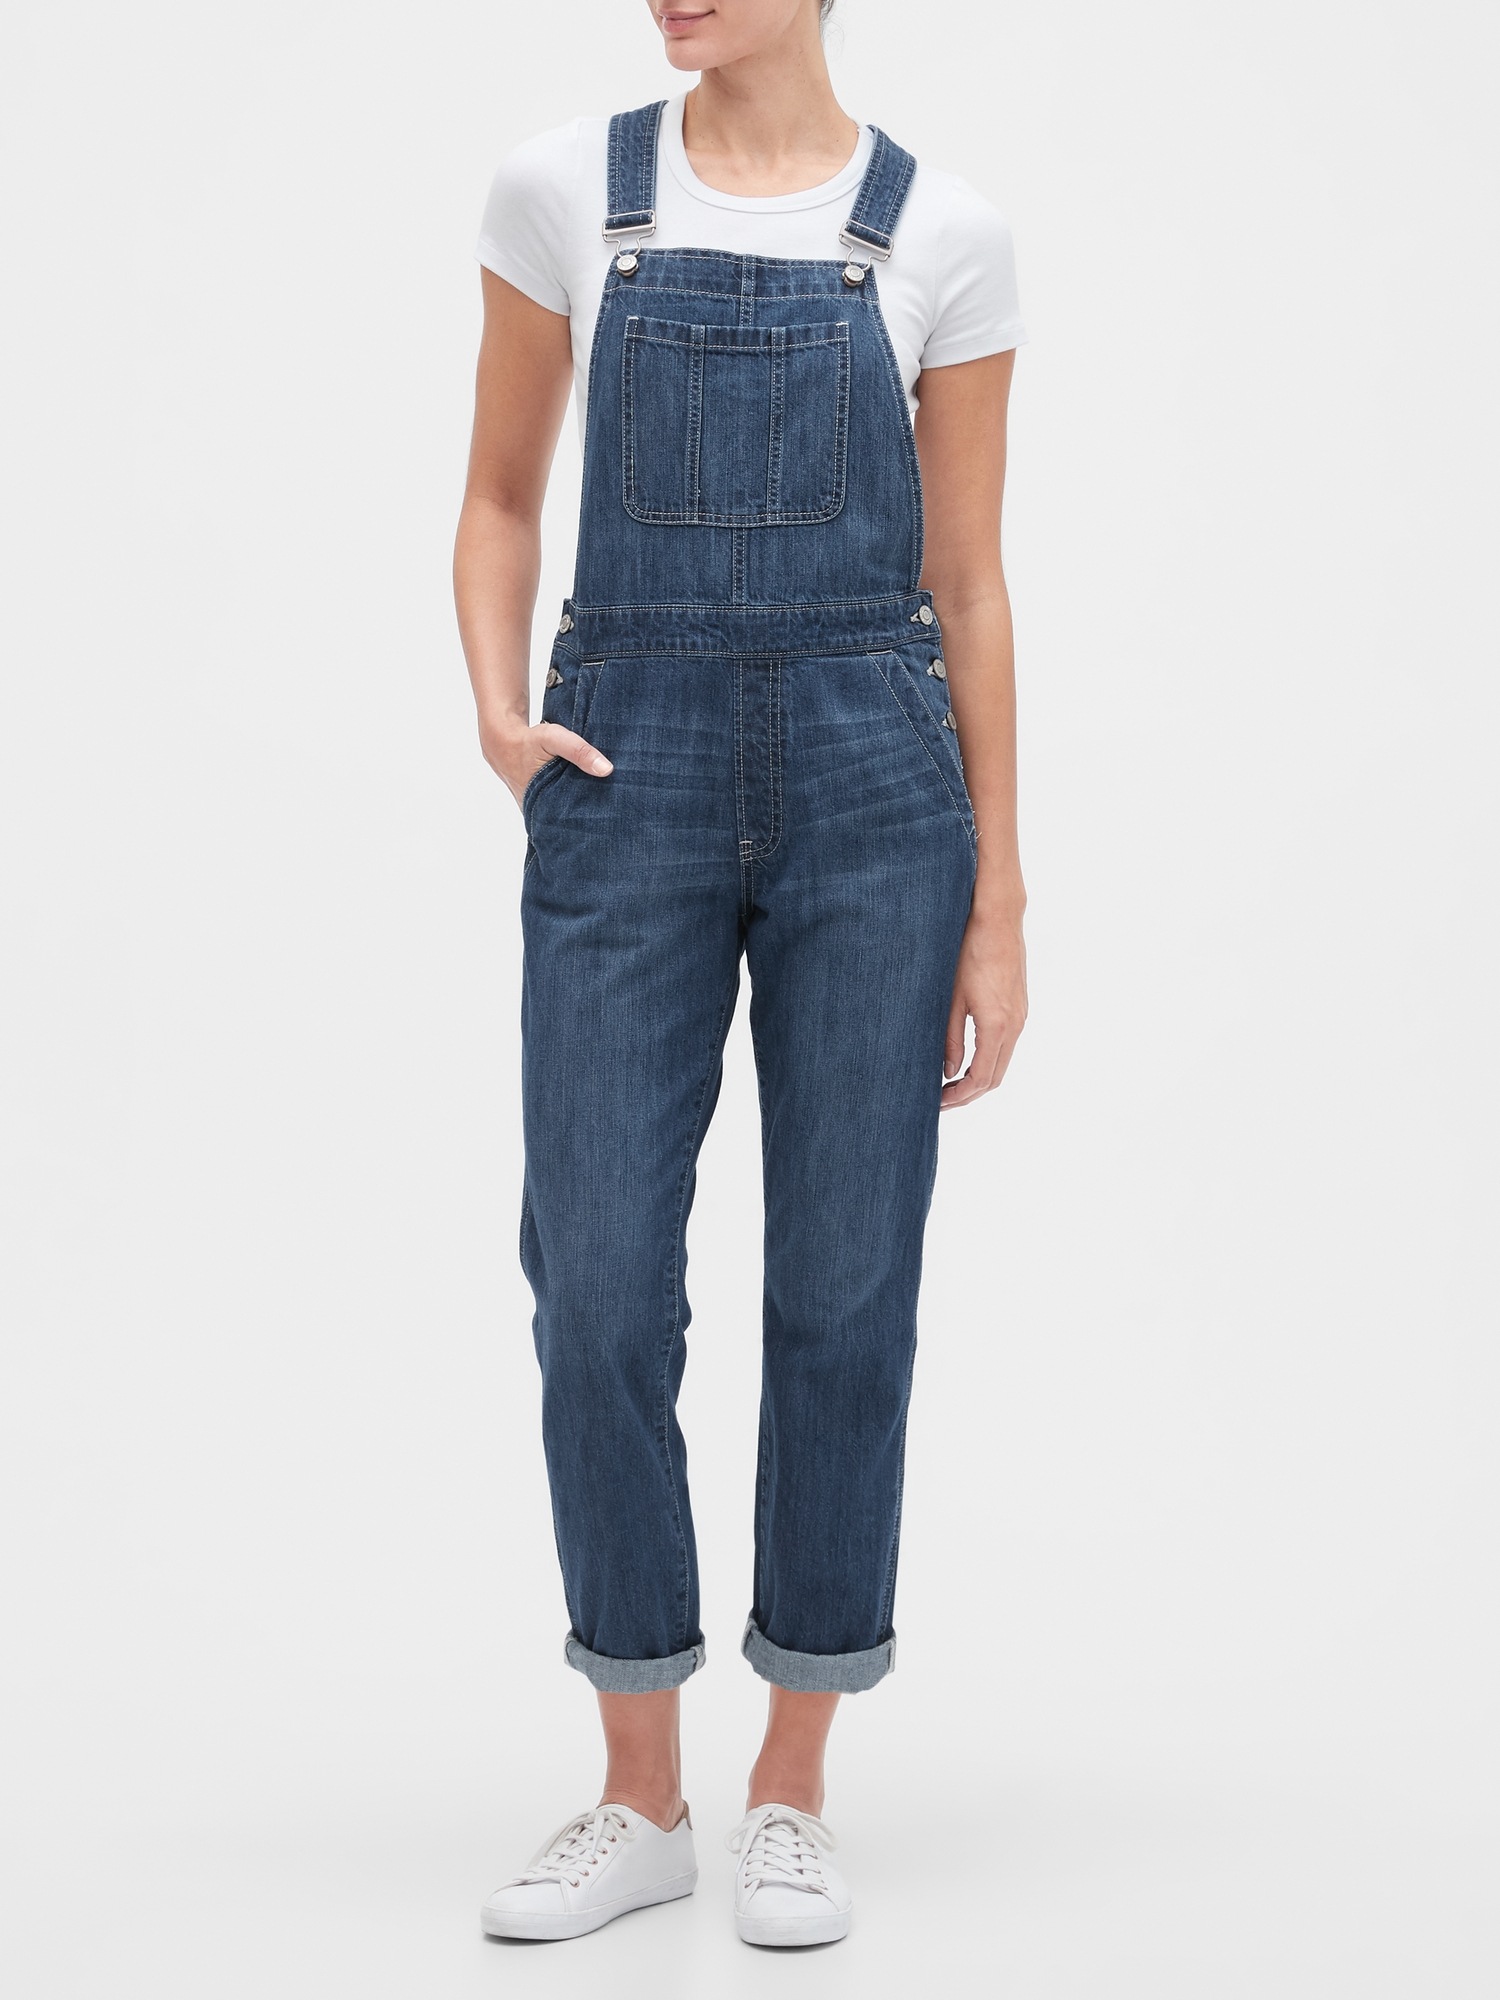 Relaxed Denim Overalls | Gap Factory